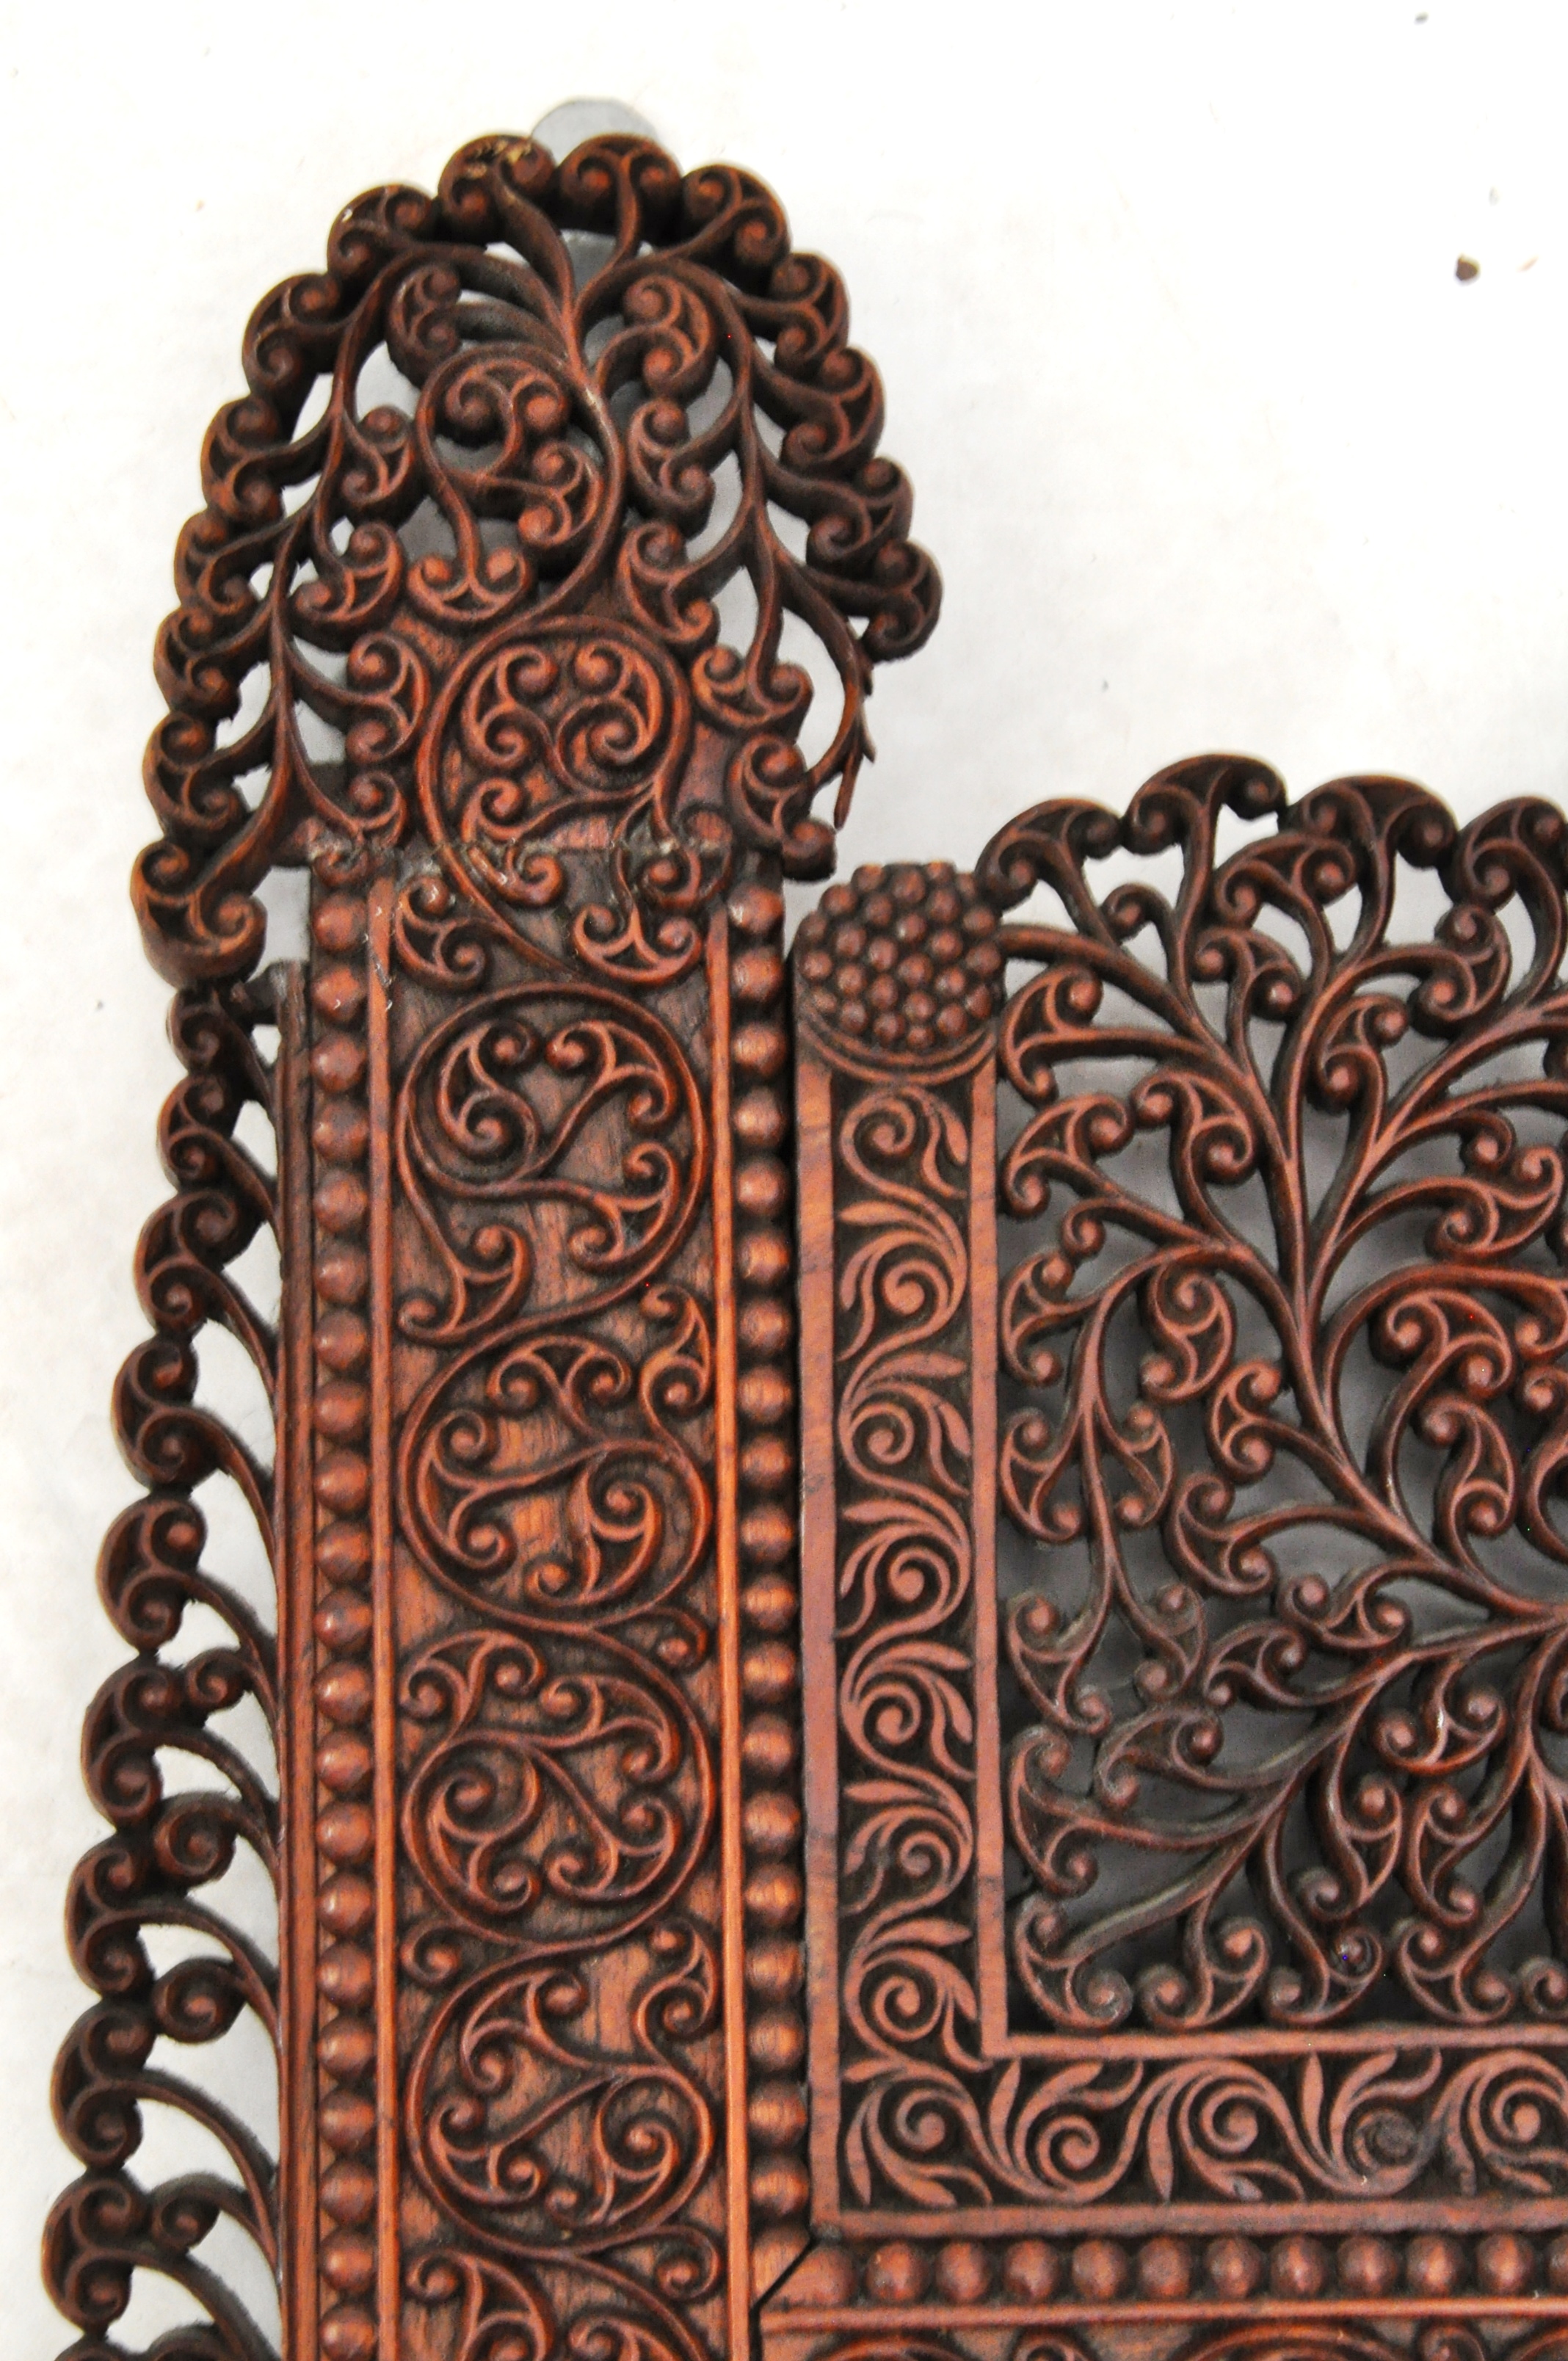 ANTIQUE 19TH CENTURY INDIAN CARVED WOOD ORNATE OVERMANTLE MIRROR - Image 7 of 7